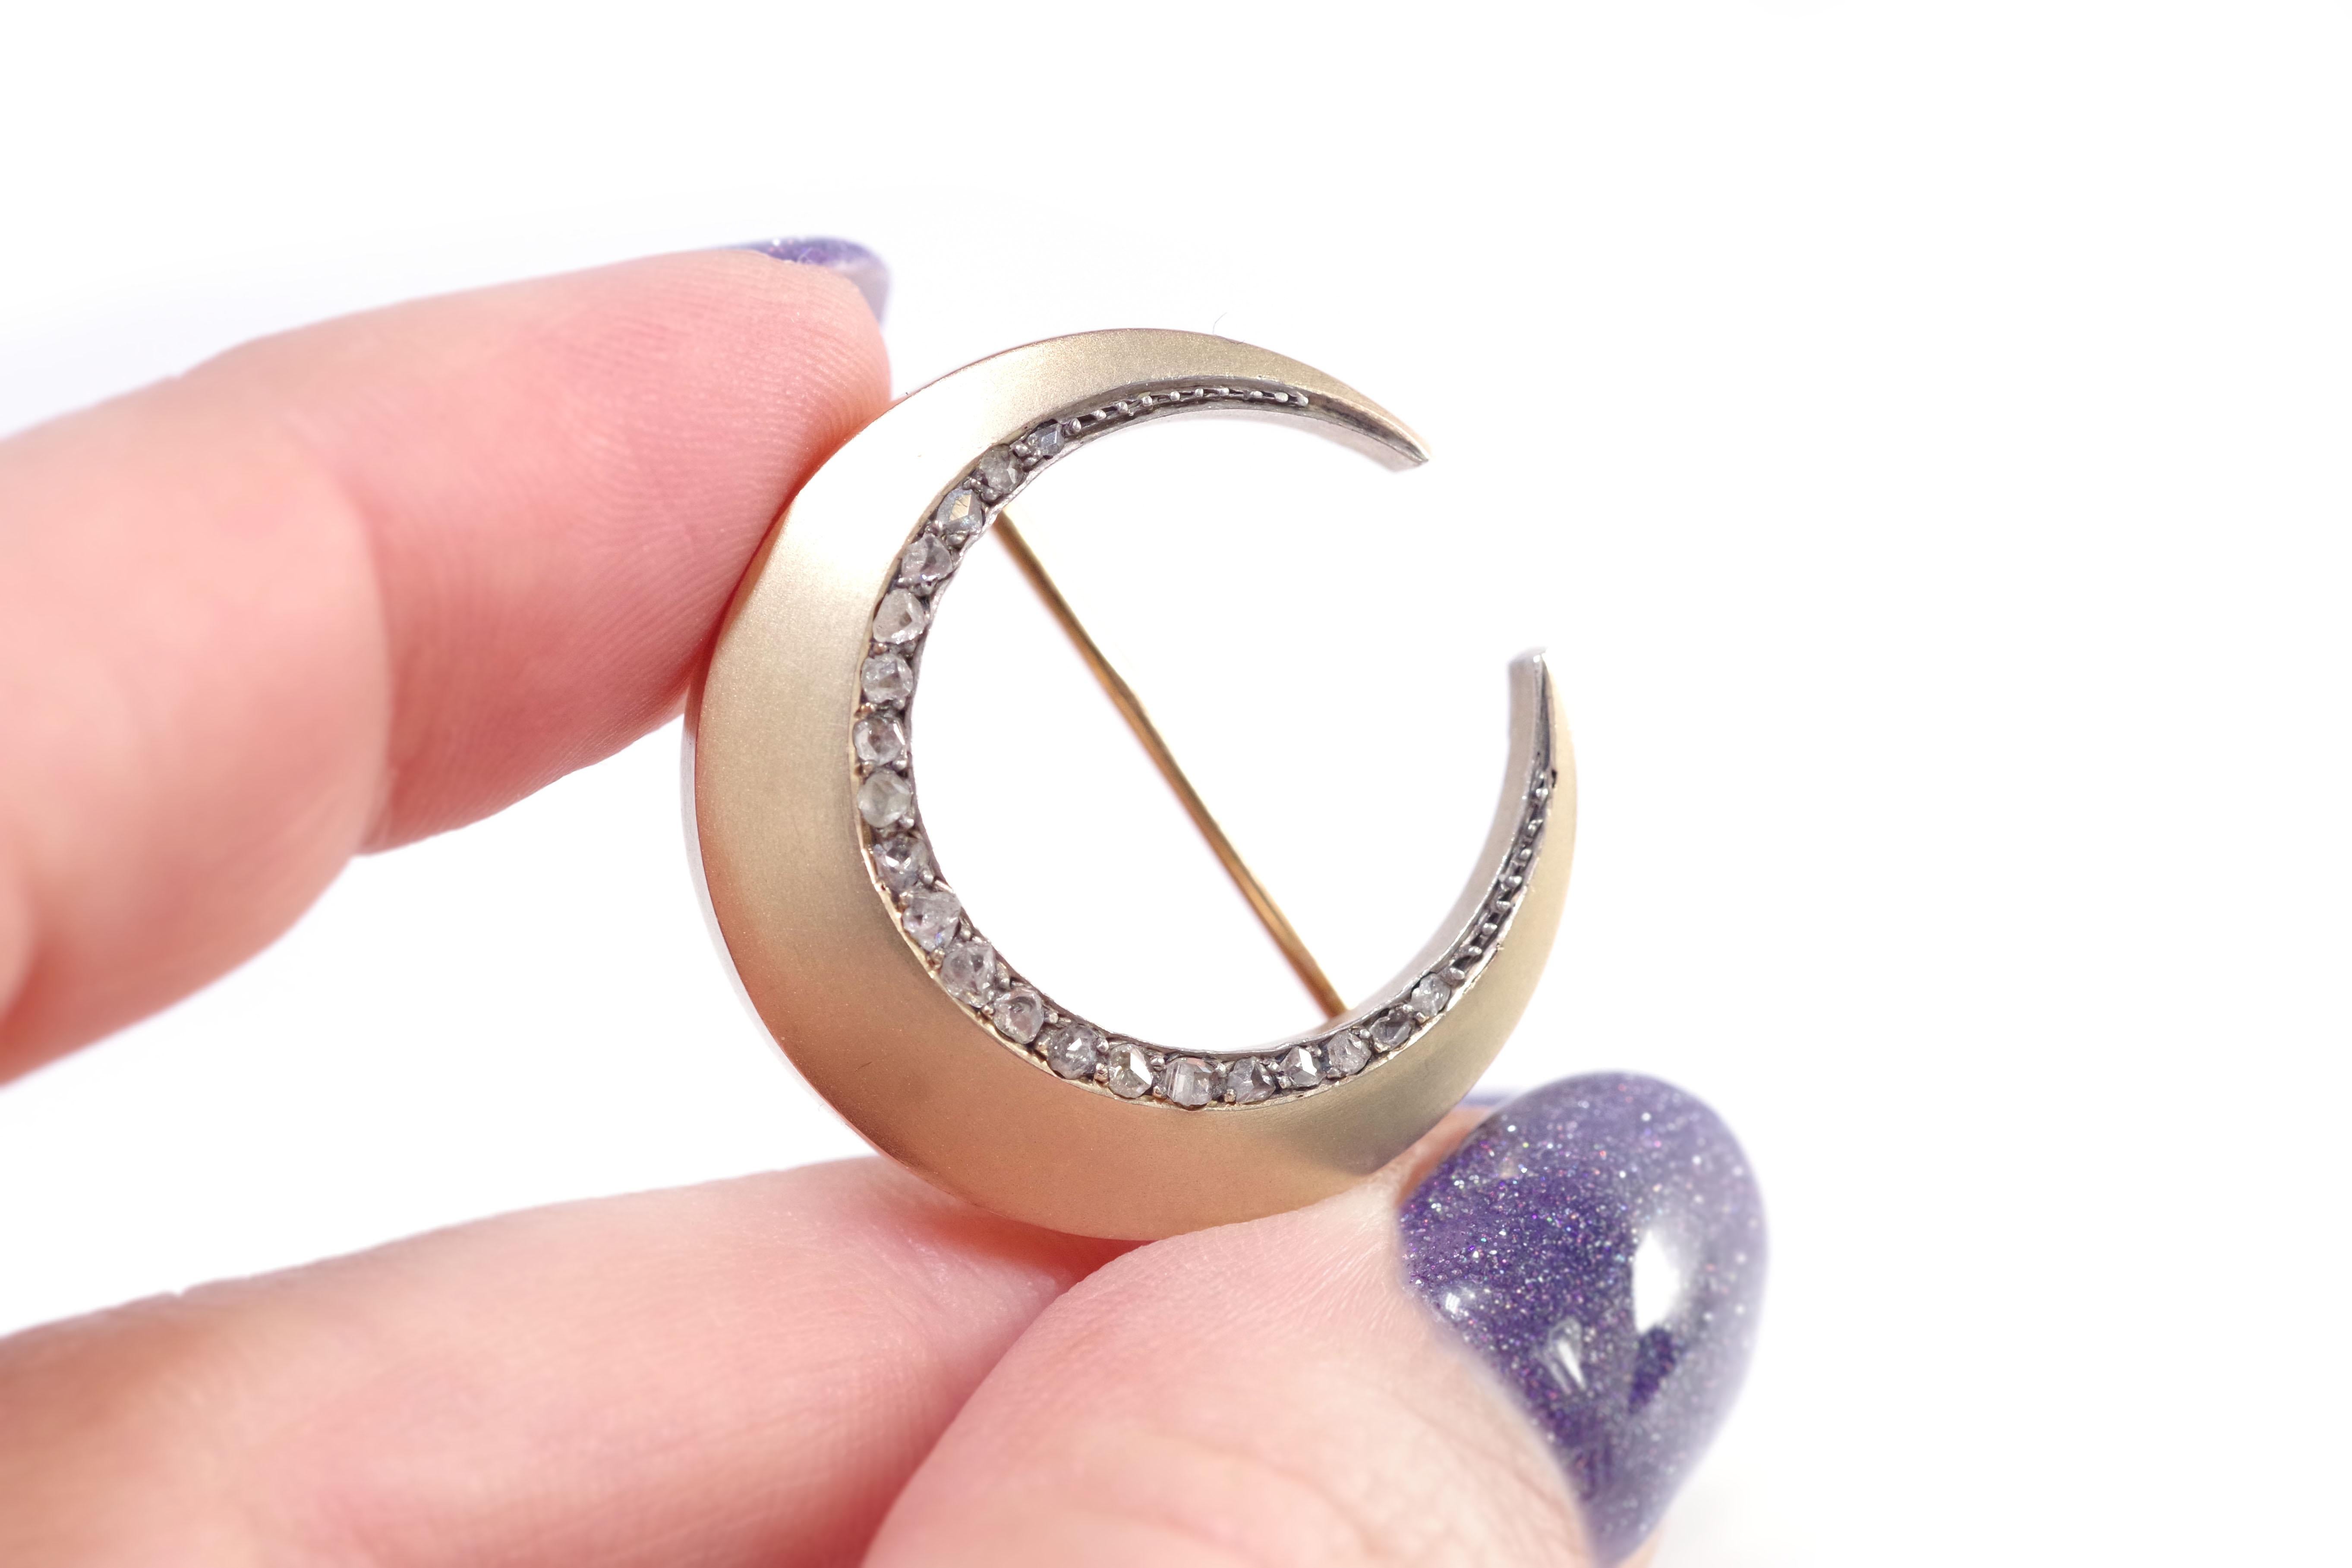 Art Deco Edwardian crescent moon brooch in 18k gold with diamonds, art deco brooch For Sale